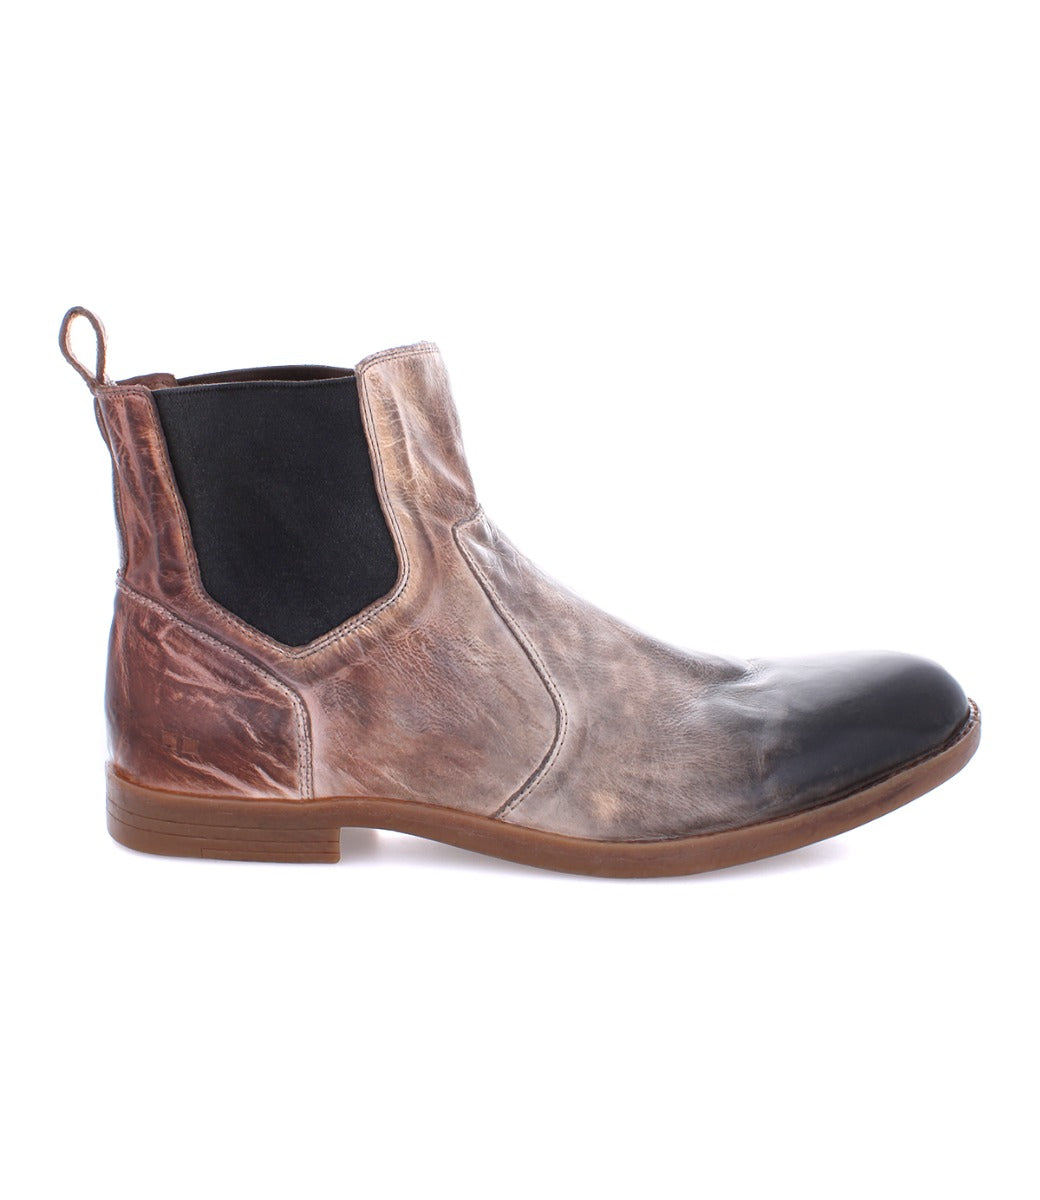 A men's brown leather Vasari chelsea boot by Bed Stu on a white background.